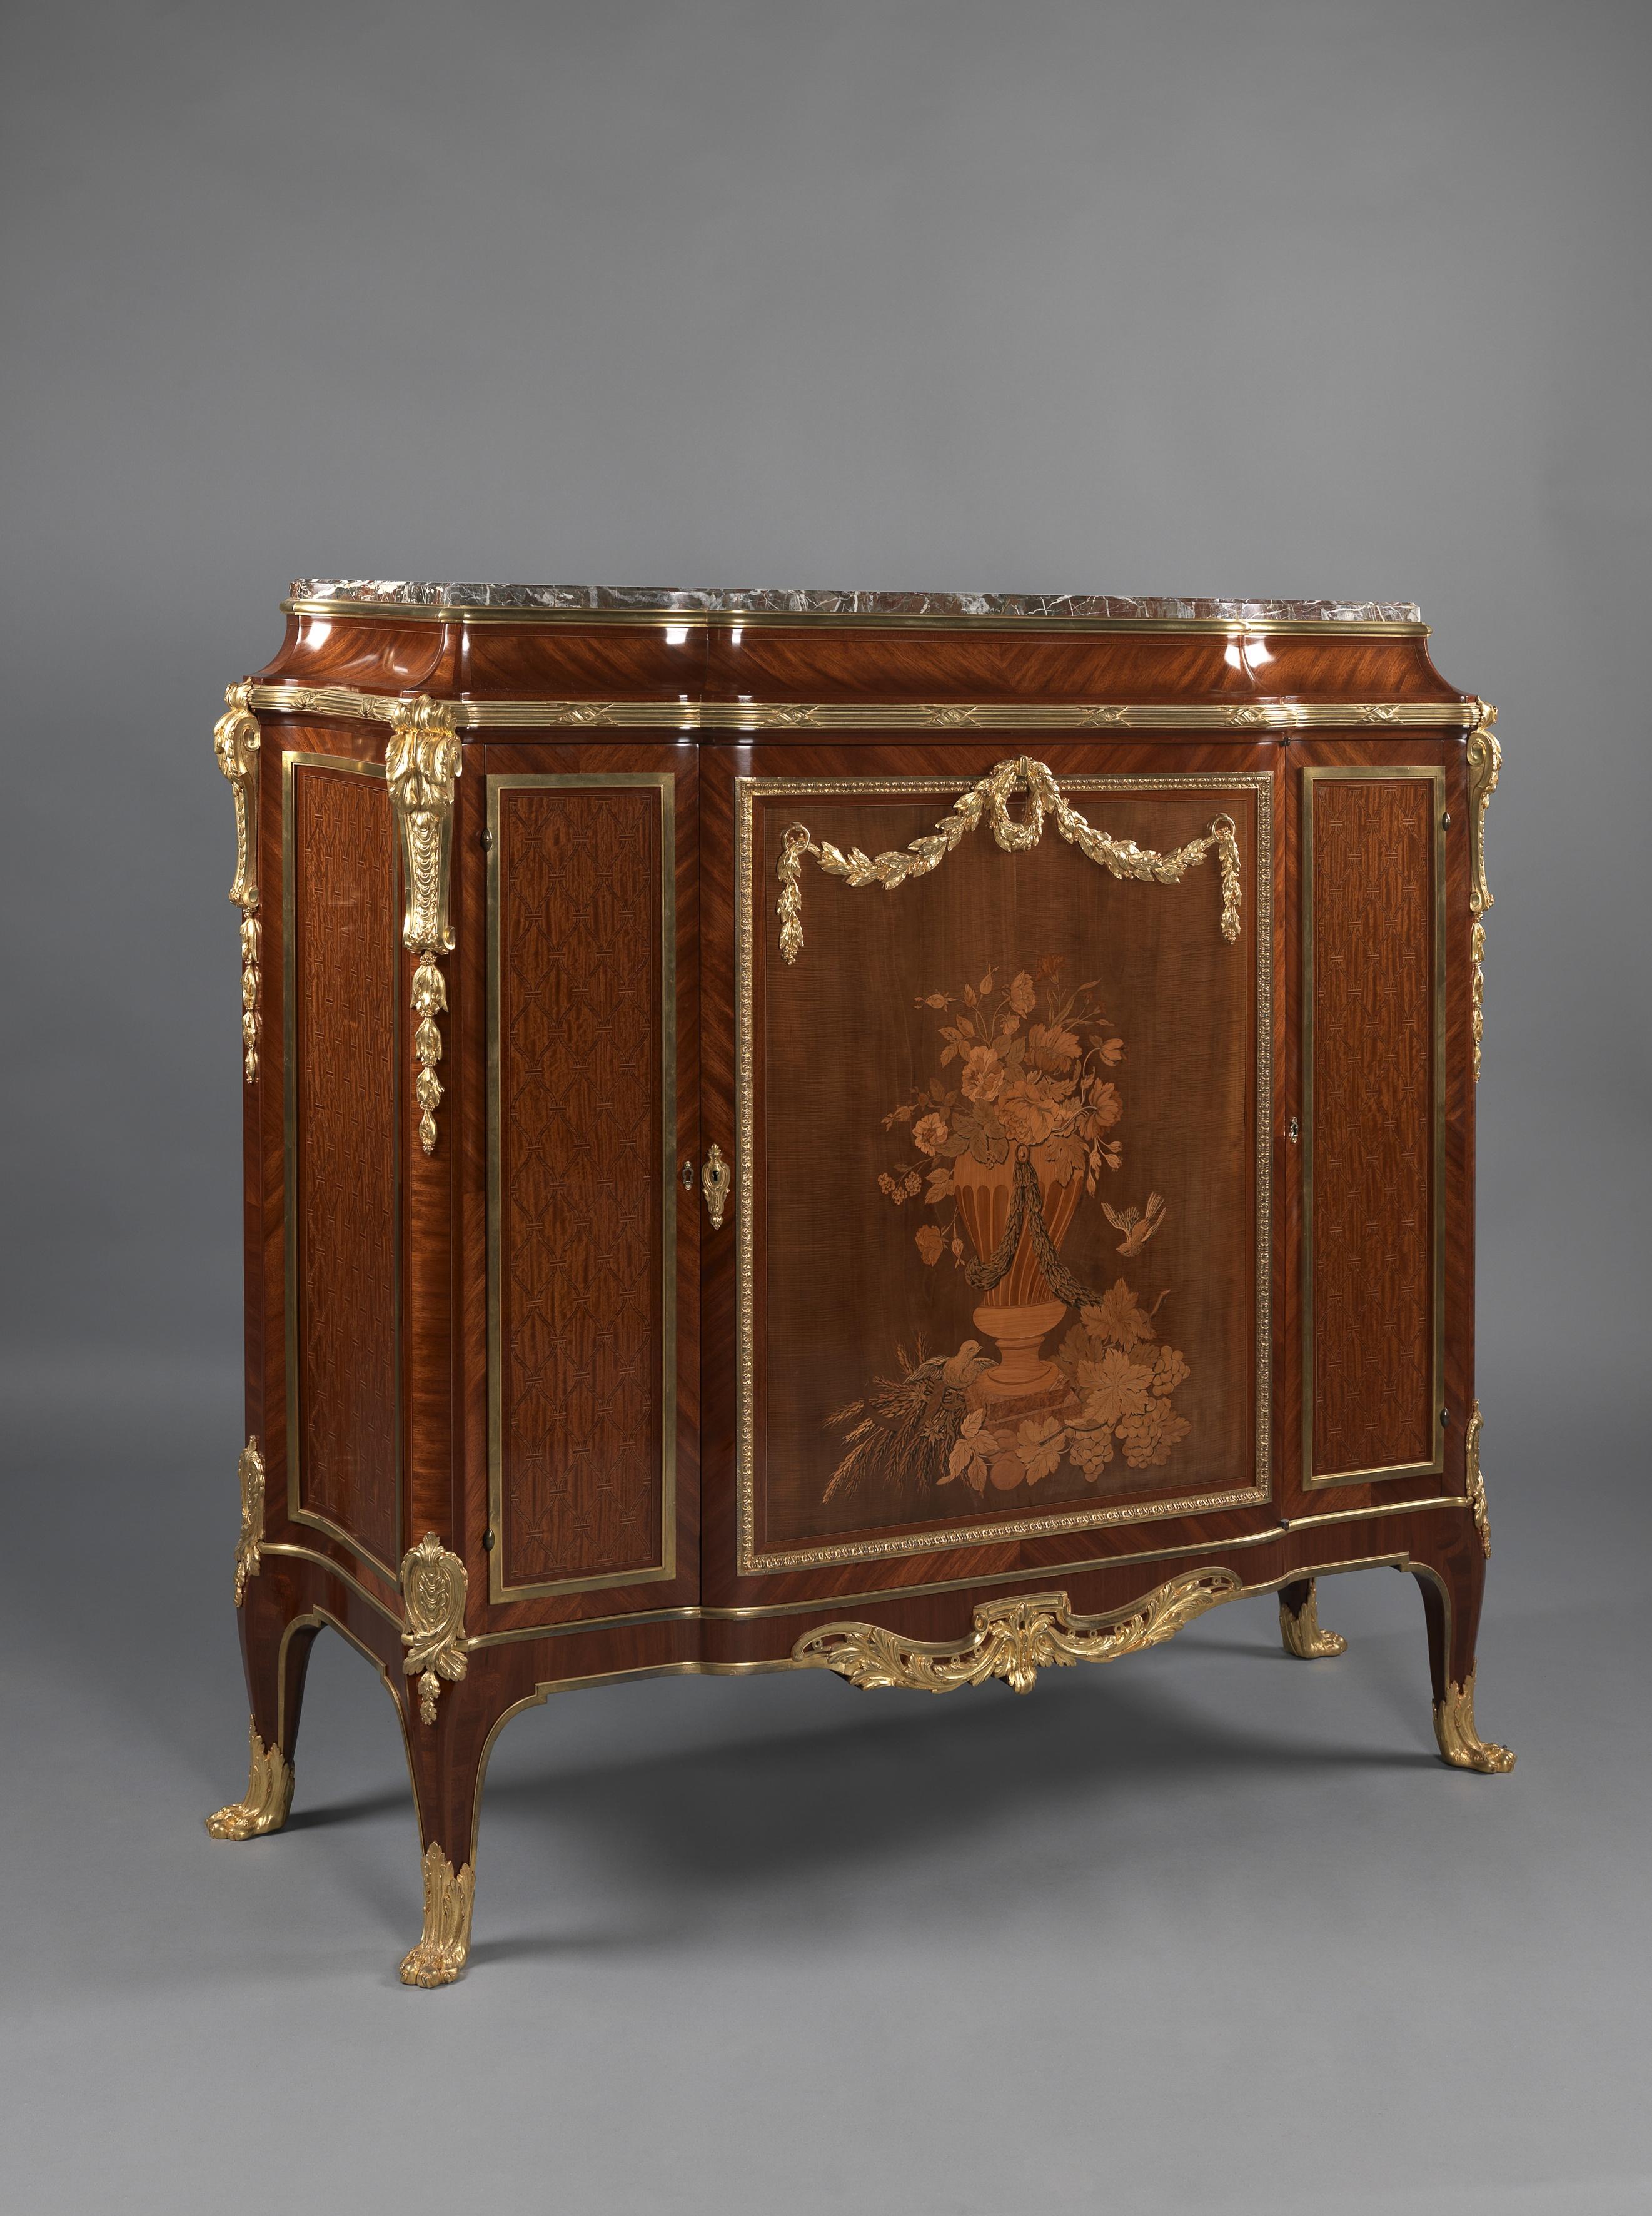 A fine Transitional style Marquetry-inlaid side cabinet with a Rouge de rance marble-top.

French, dated 1912. 

Marked ‘SJ' and dated 1912 in the marquetry. 

This impressive side cabinet has a red and grey veined marble top above a concave